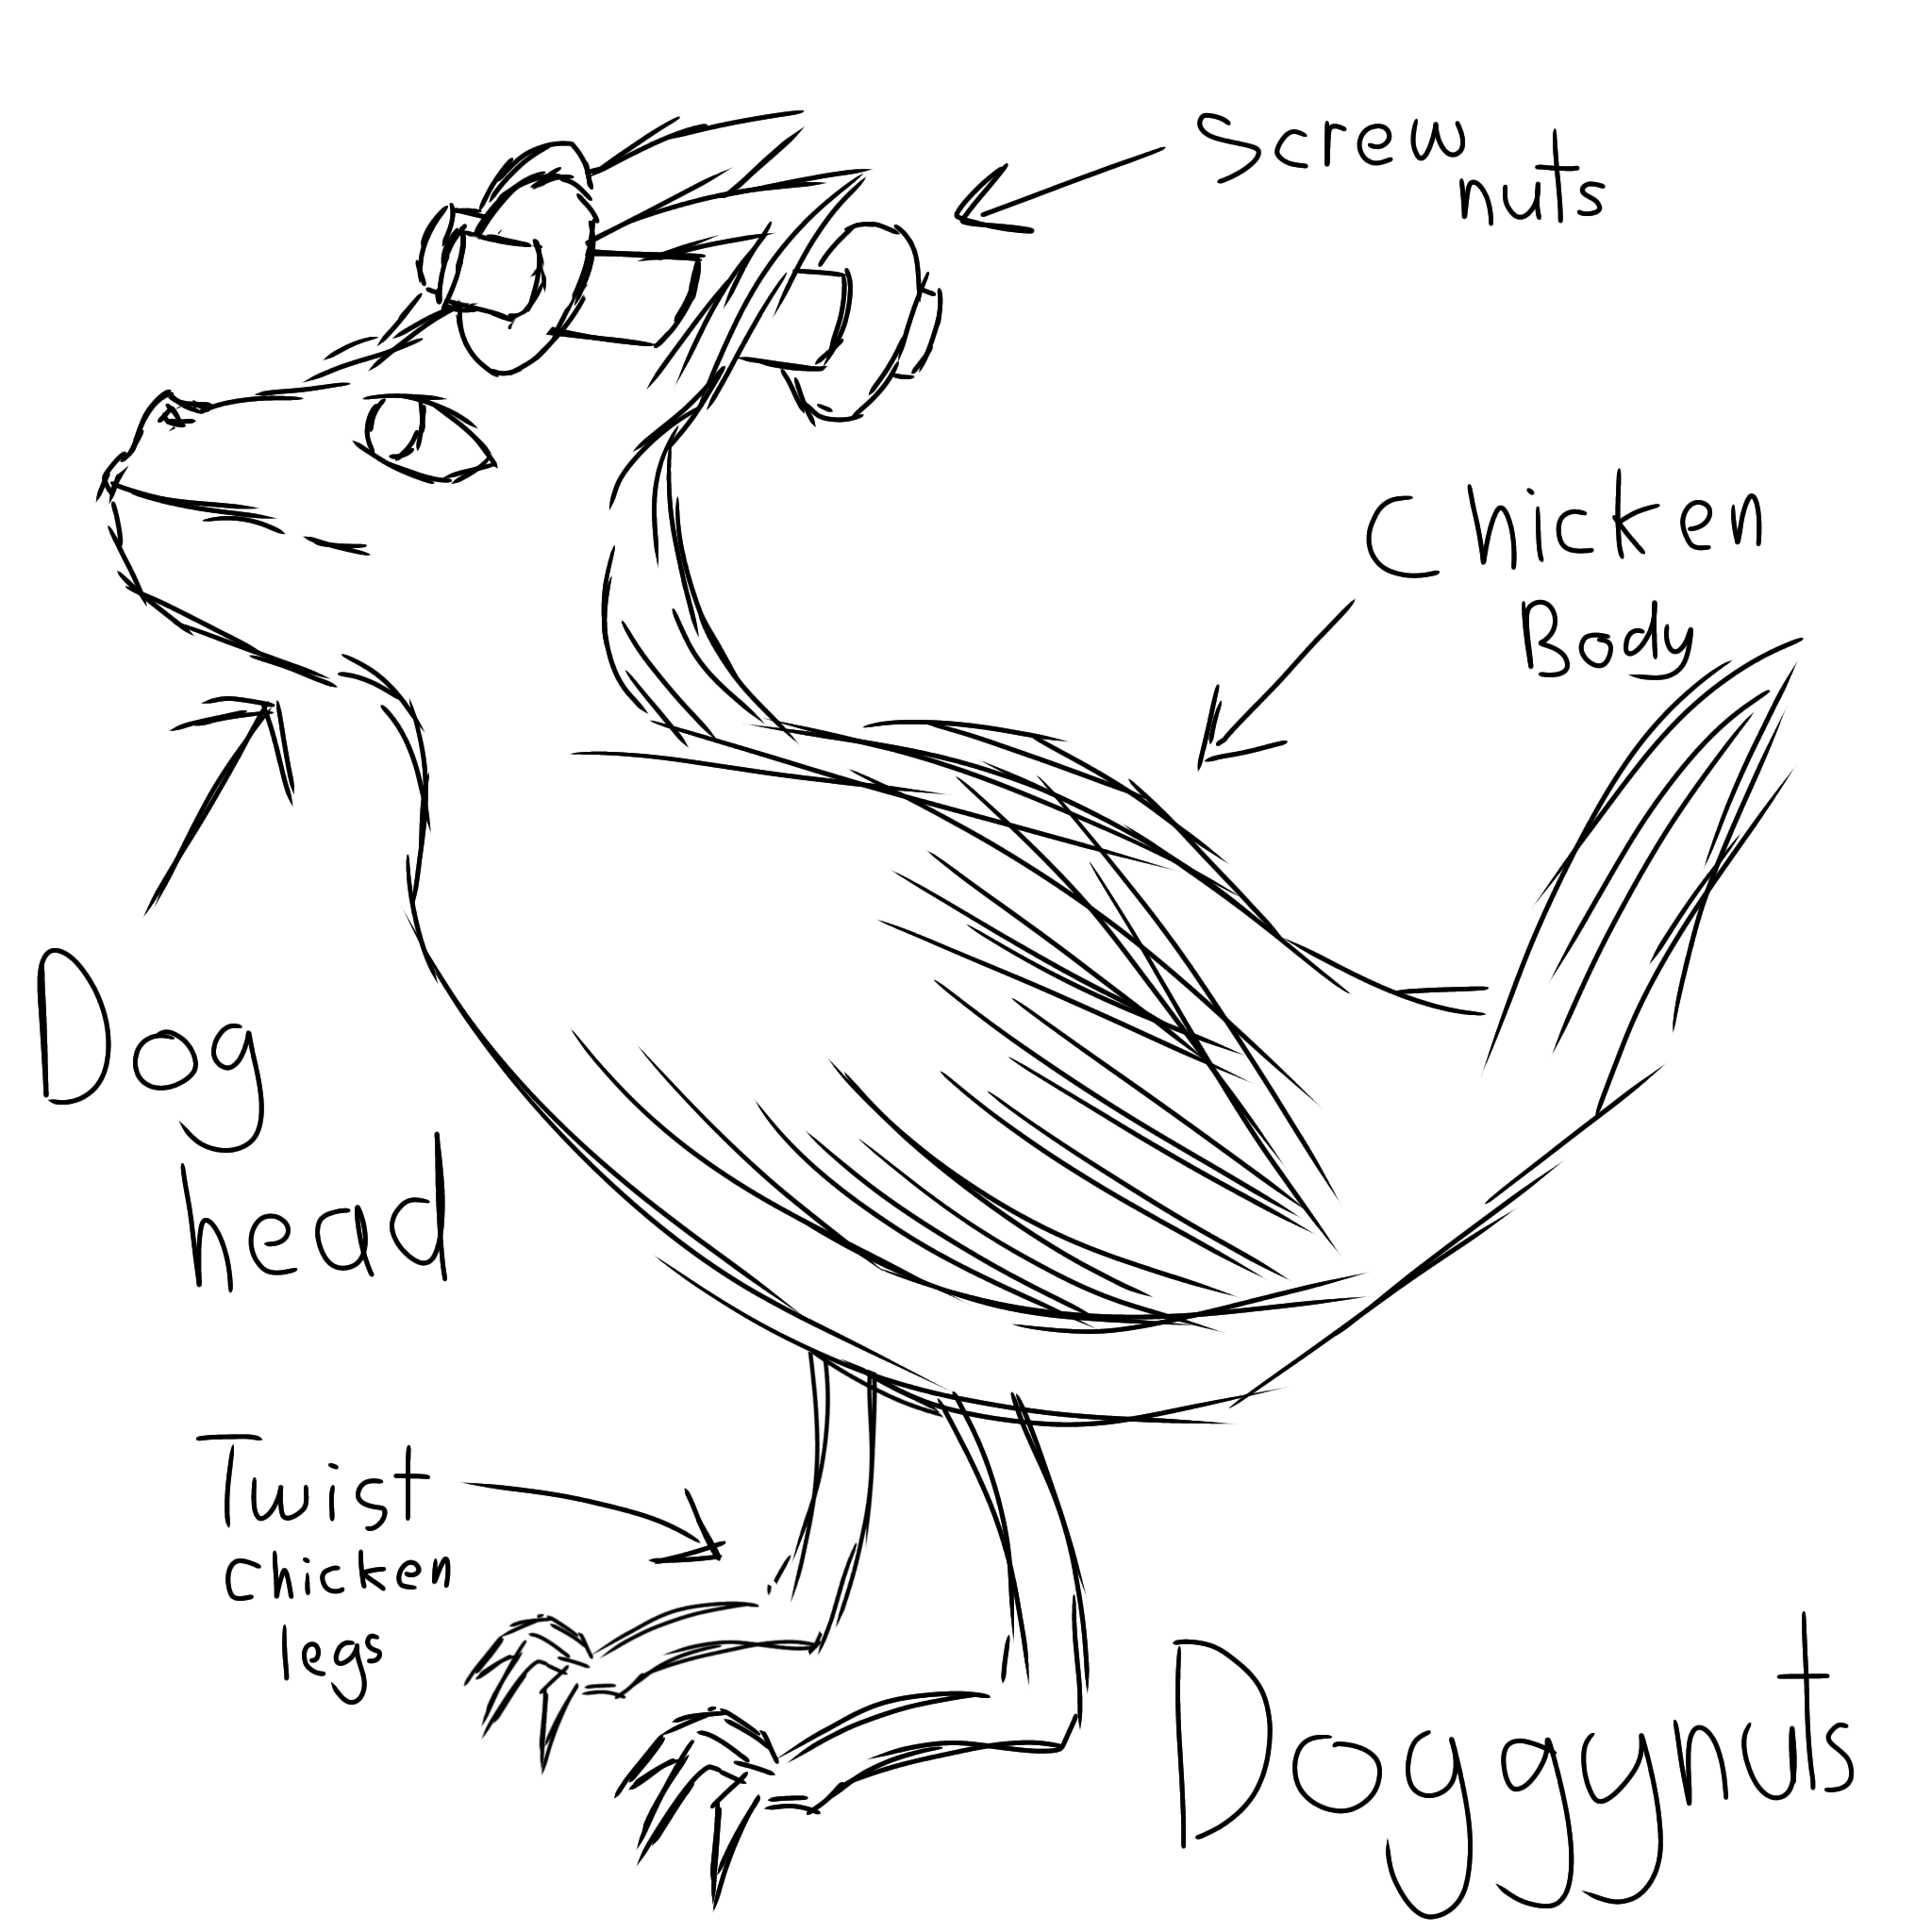 Doggynuts.png